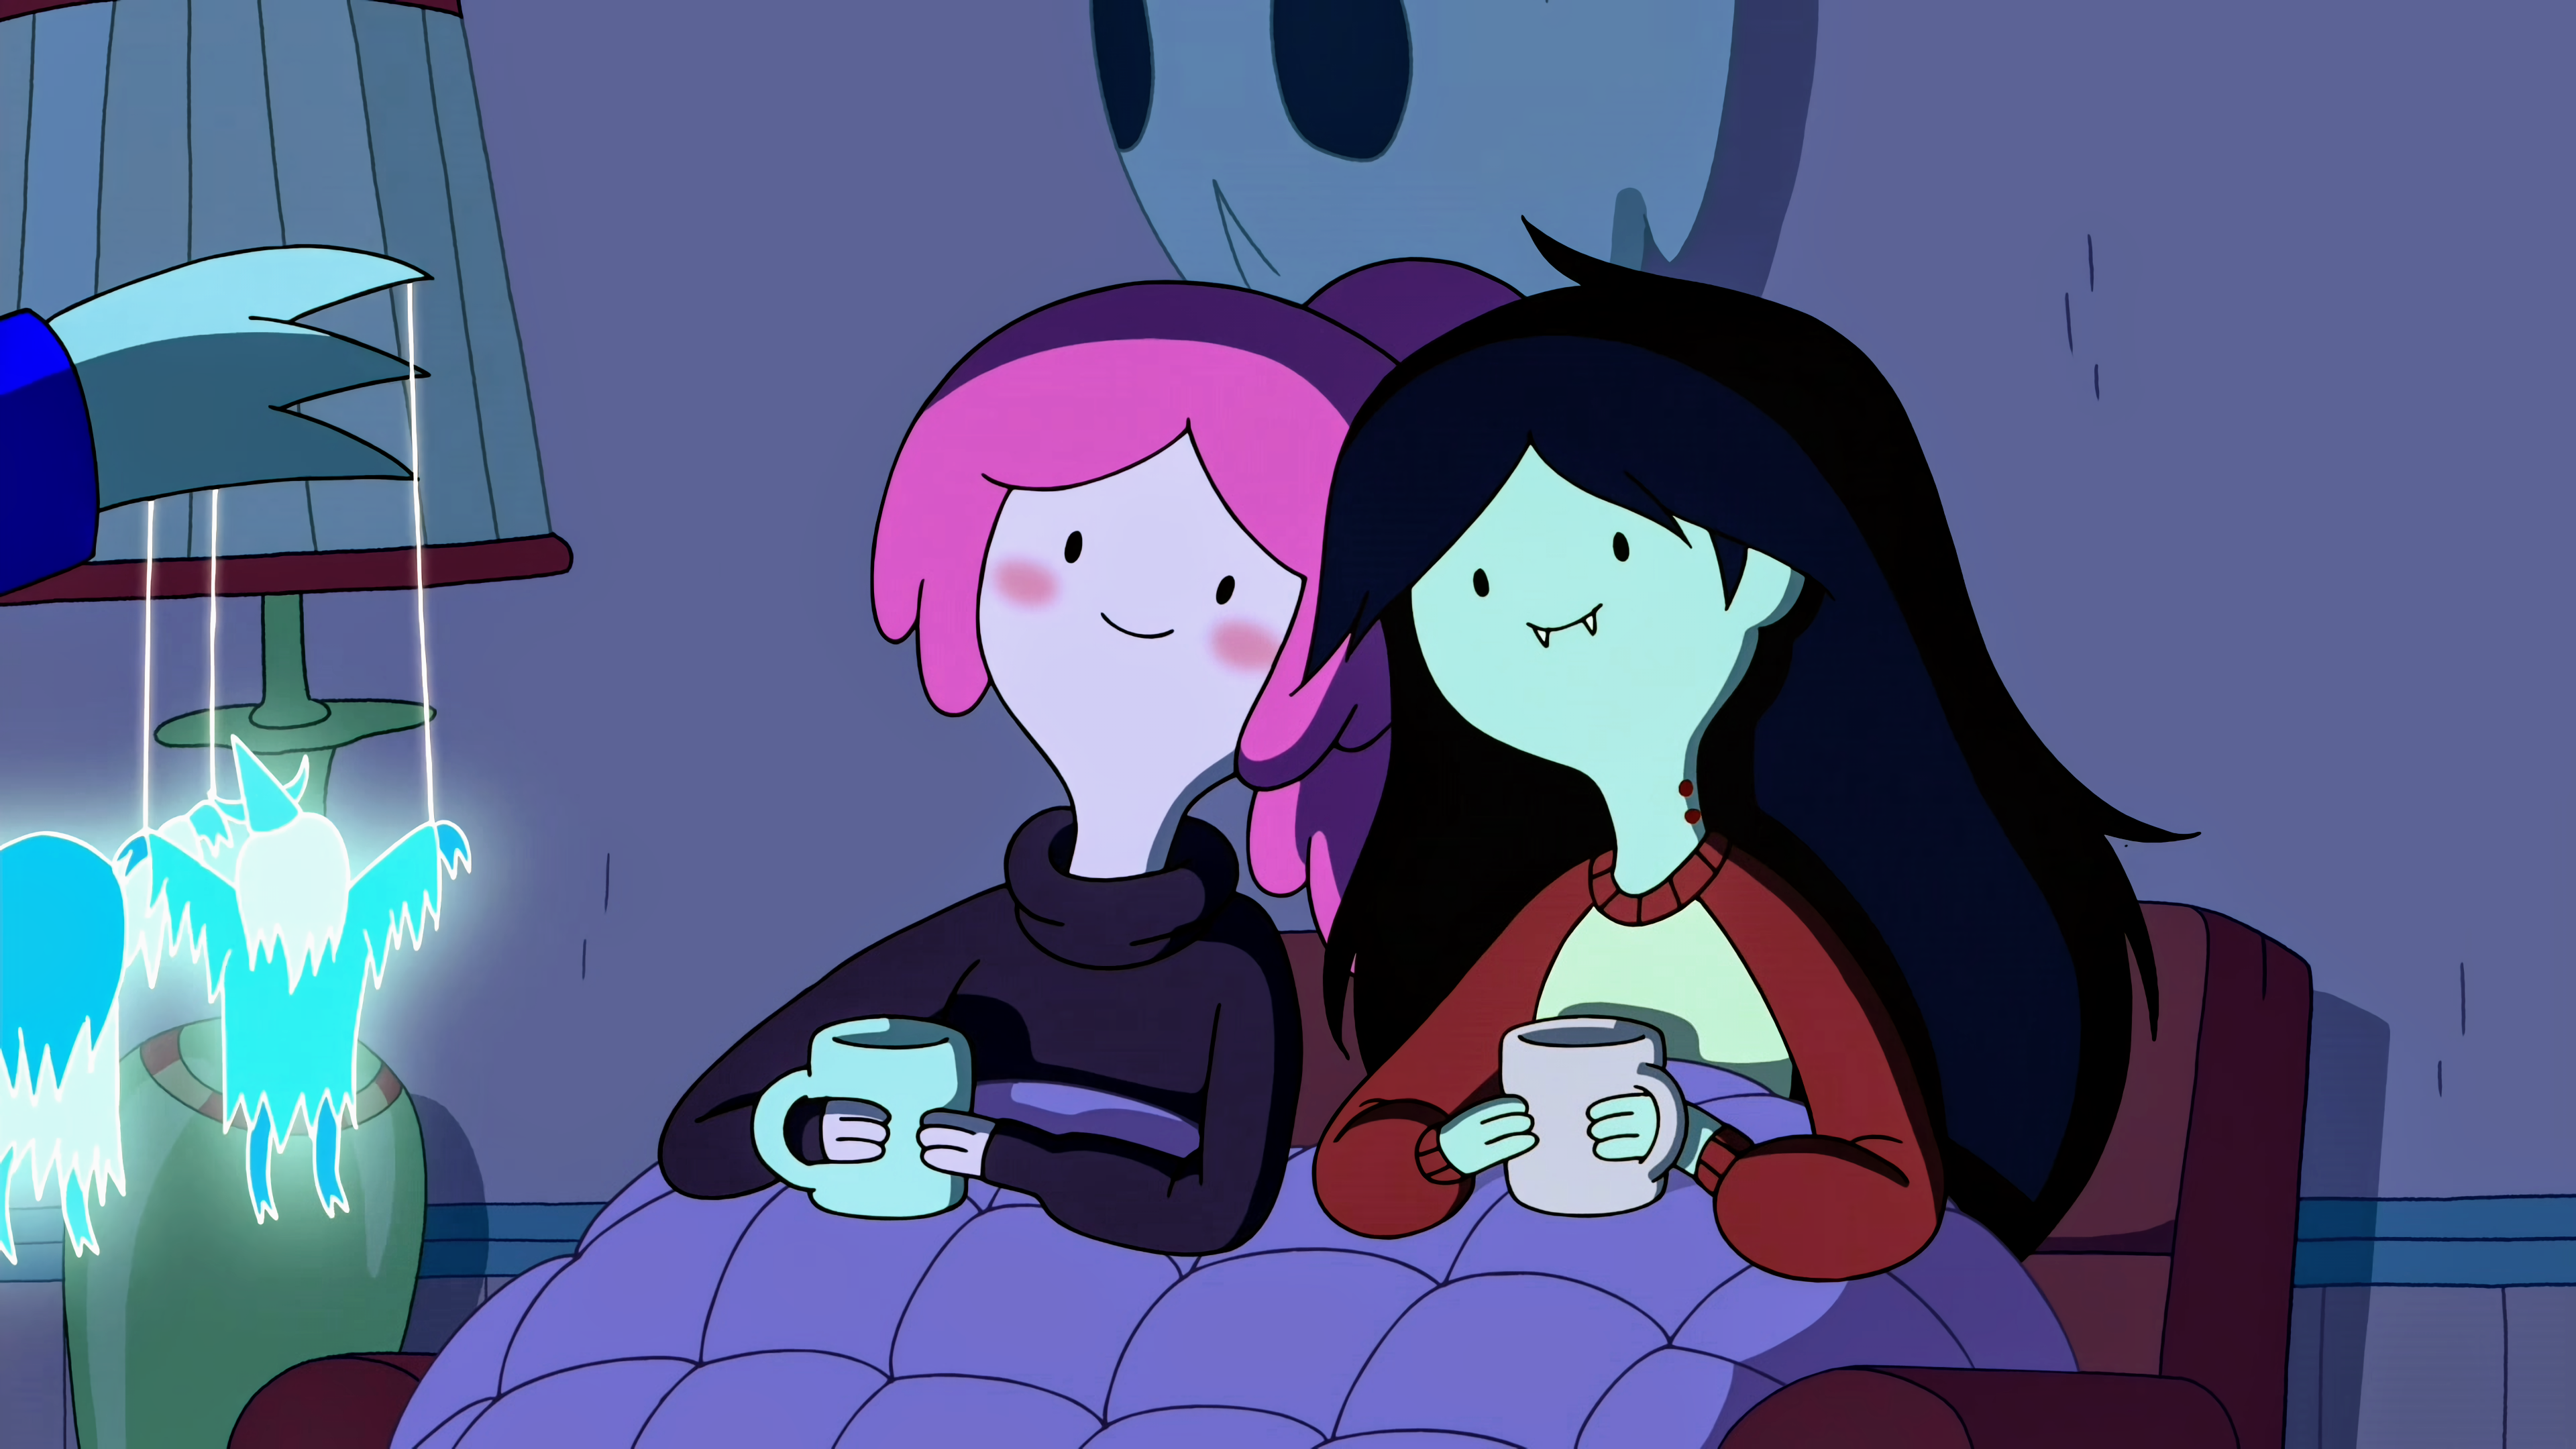 Princess Bubblegum and Marceline the Vampire Queen cuddling in bed with a mug each.